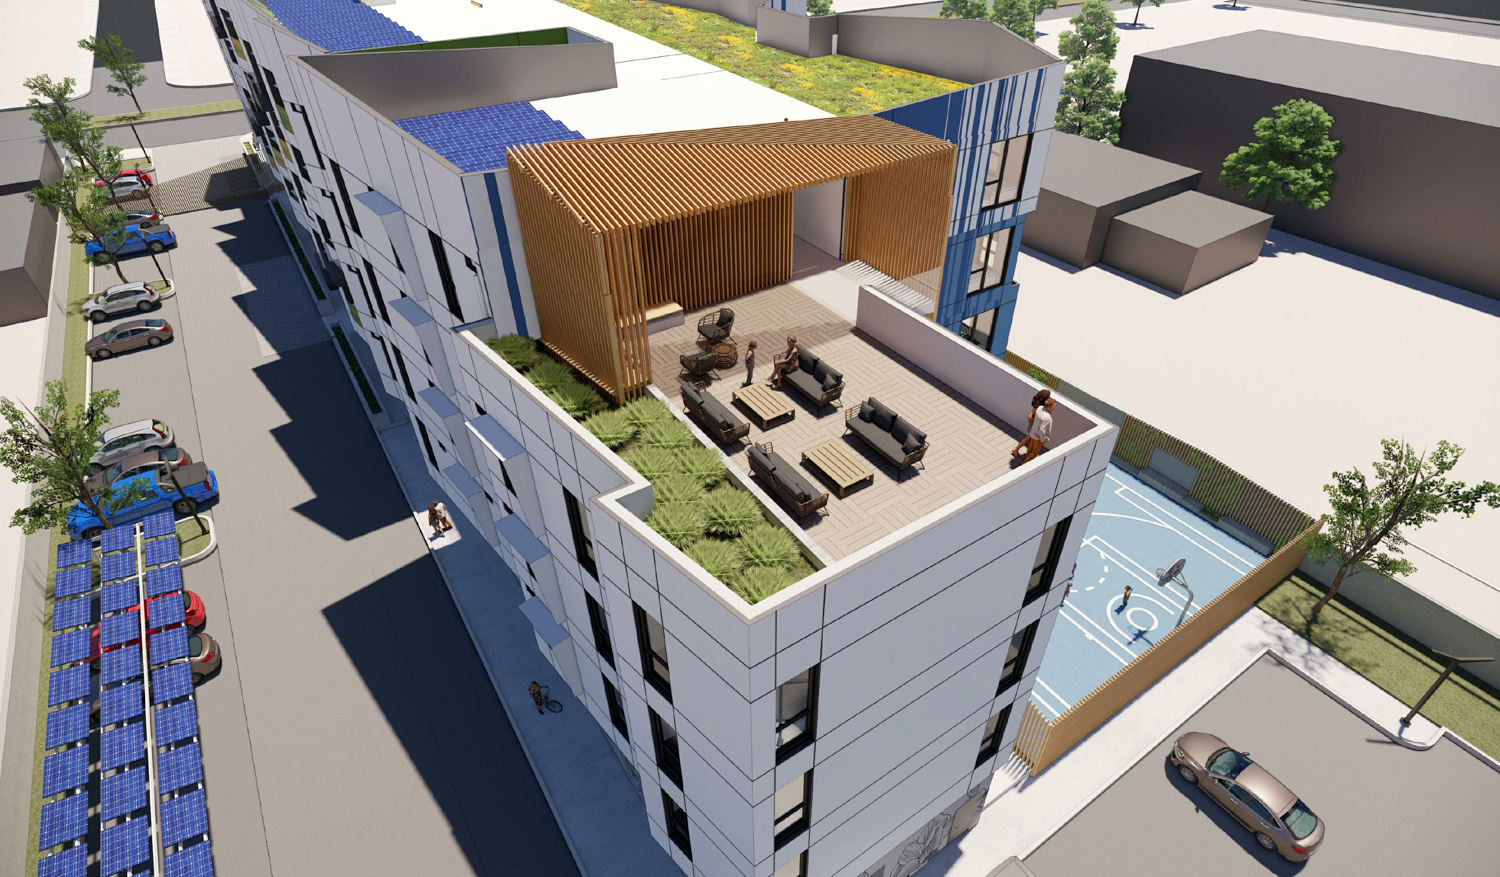 Magnolias Affordable Housing Project aerial view of the residential roof deck amenity and surface parking, rendering by SERA Architects